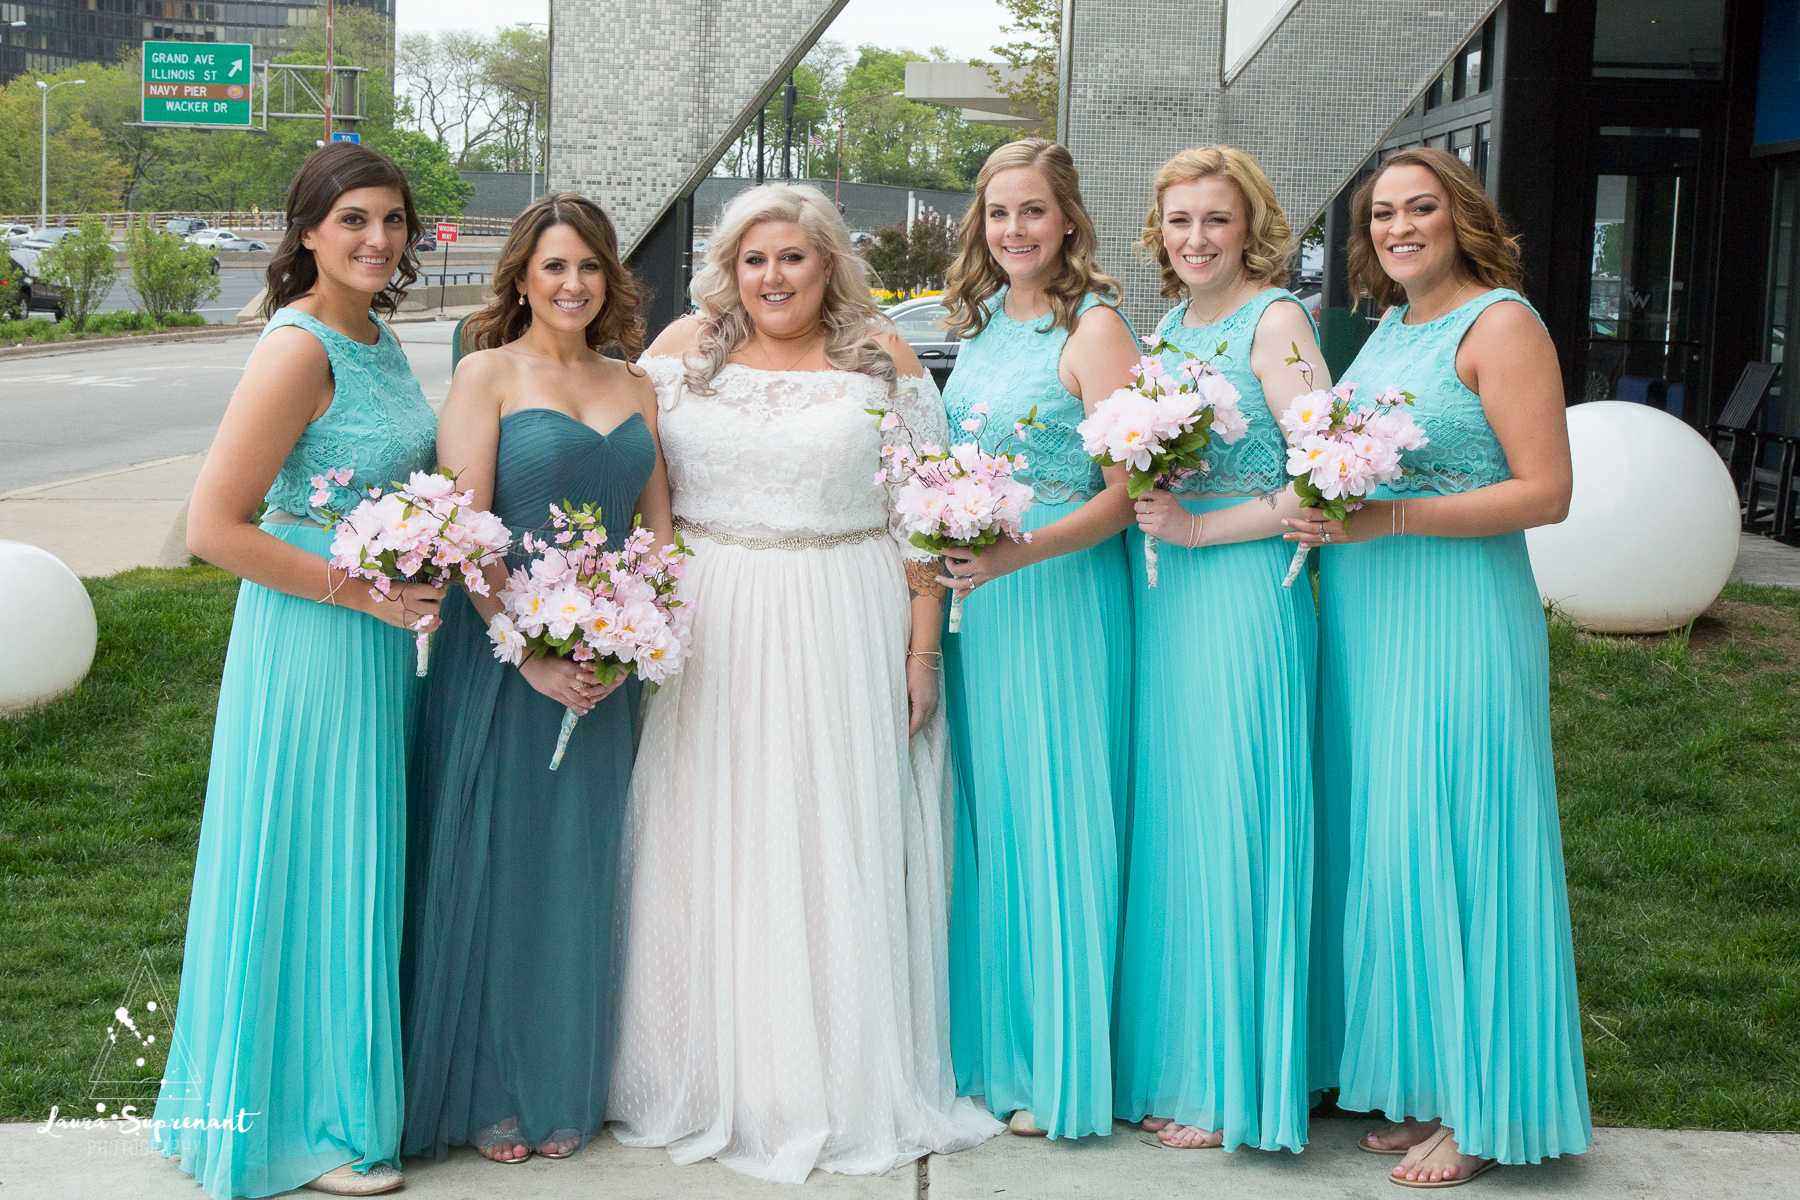 wedding_photography_chicago_wrigley_field_ravenswood_event_center_laura_suprenant (9 of 82).jpg